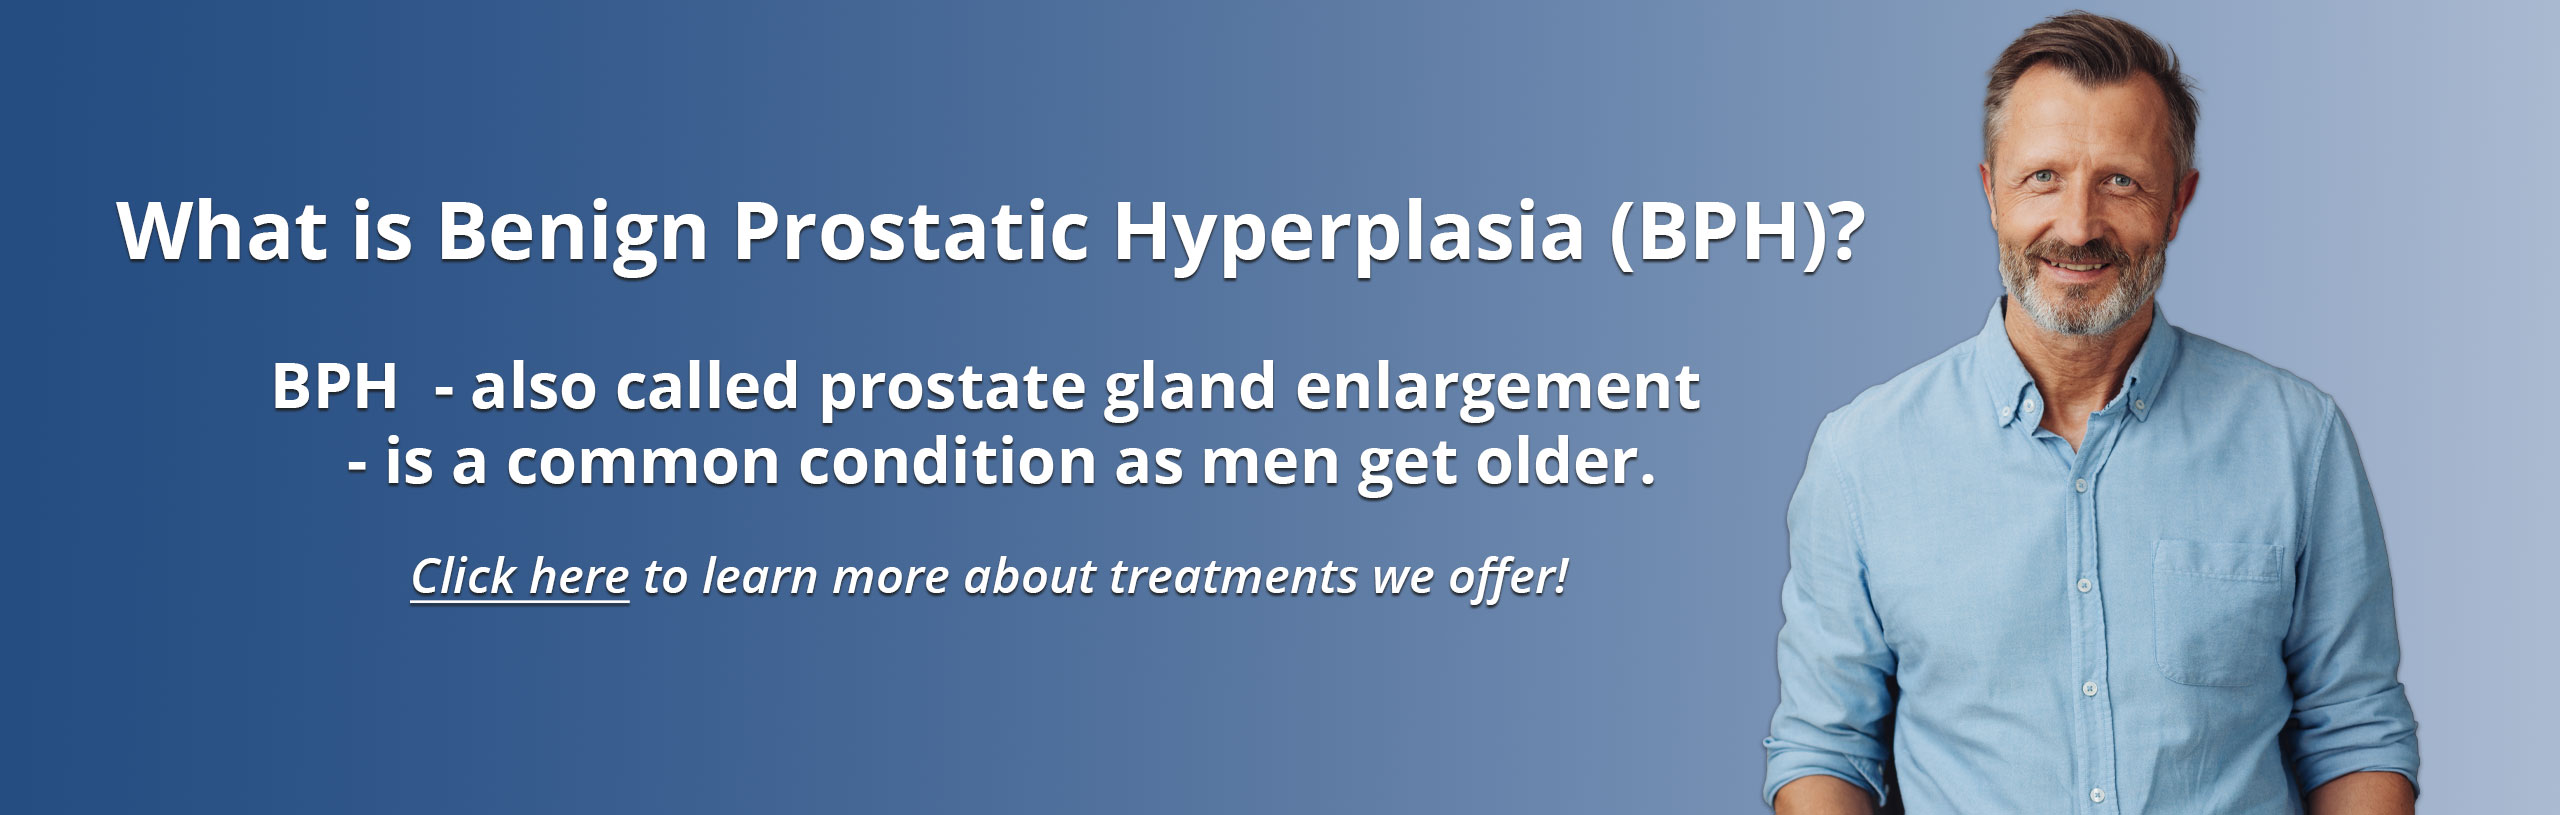 What is Benign Prostatic Hyperplasia (BPH)?
BPH- also called prostate gland enlargement- is a common condition as men get older.
Click Here to learn more about treatments we offer!